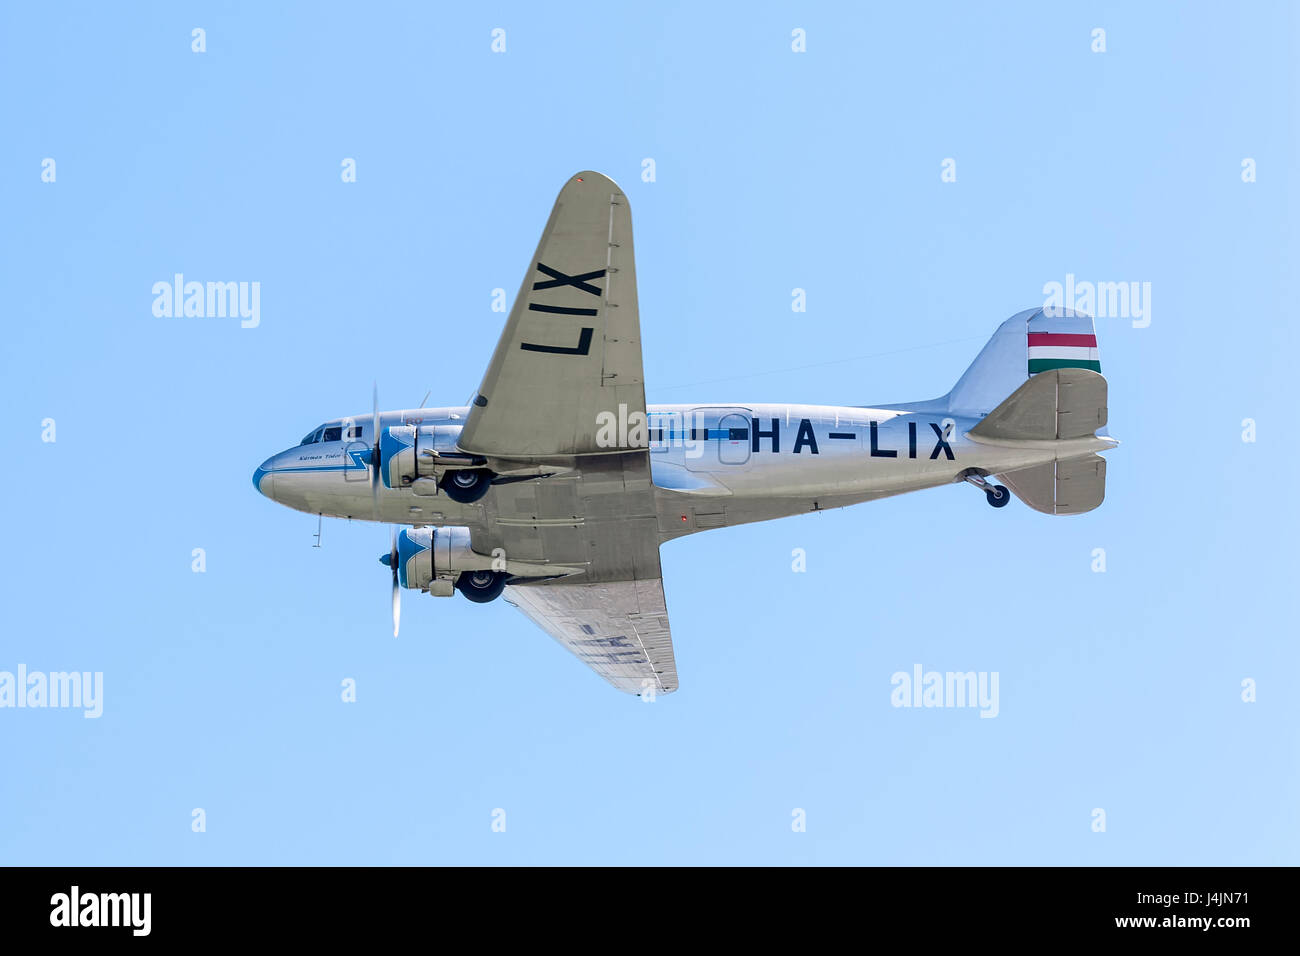 Budapest, Hungary - August 20, 2012: Lisunov Li-2 airplane (soviet copy of the famous DC-3) with historical painting over Danube river, during the Air Stock Photo